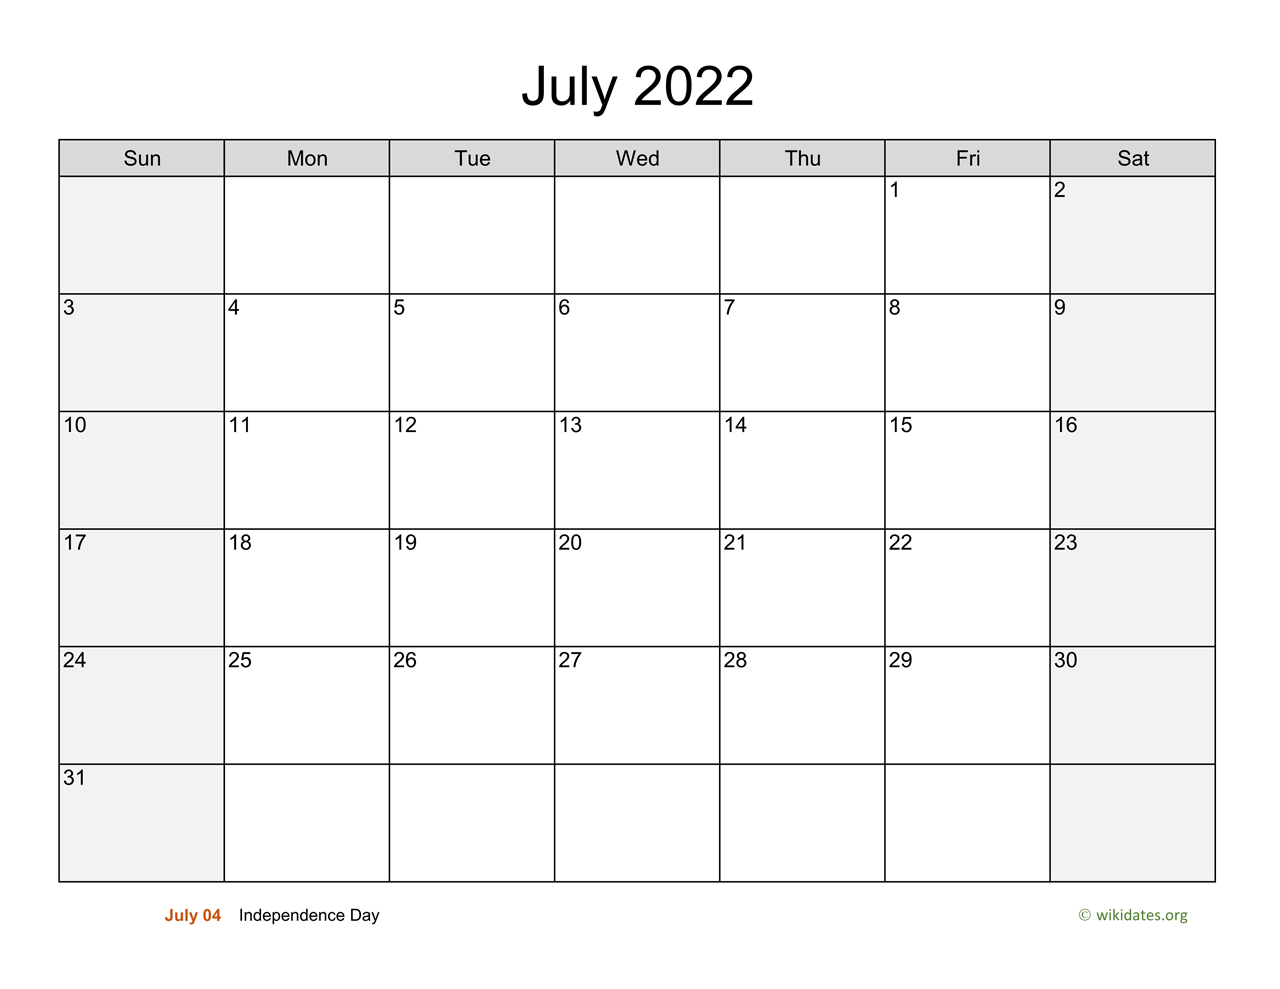 July Schedule 2022 July 2022 Calendar With Weekend Shaded | Wikidates.org